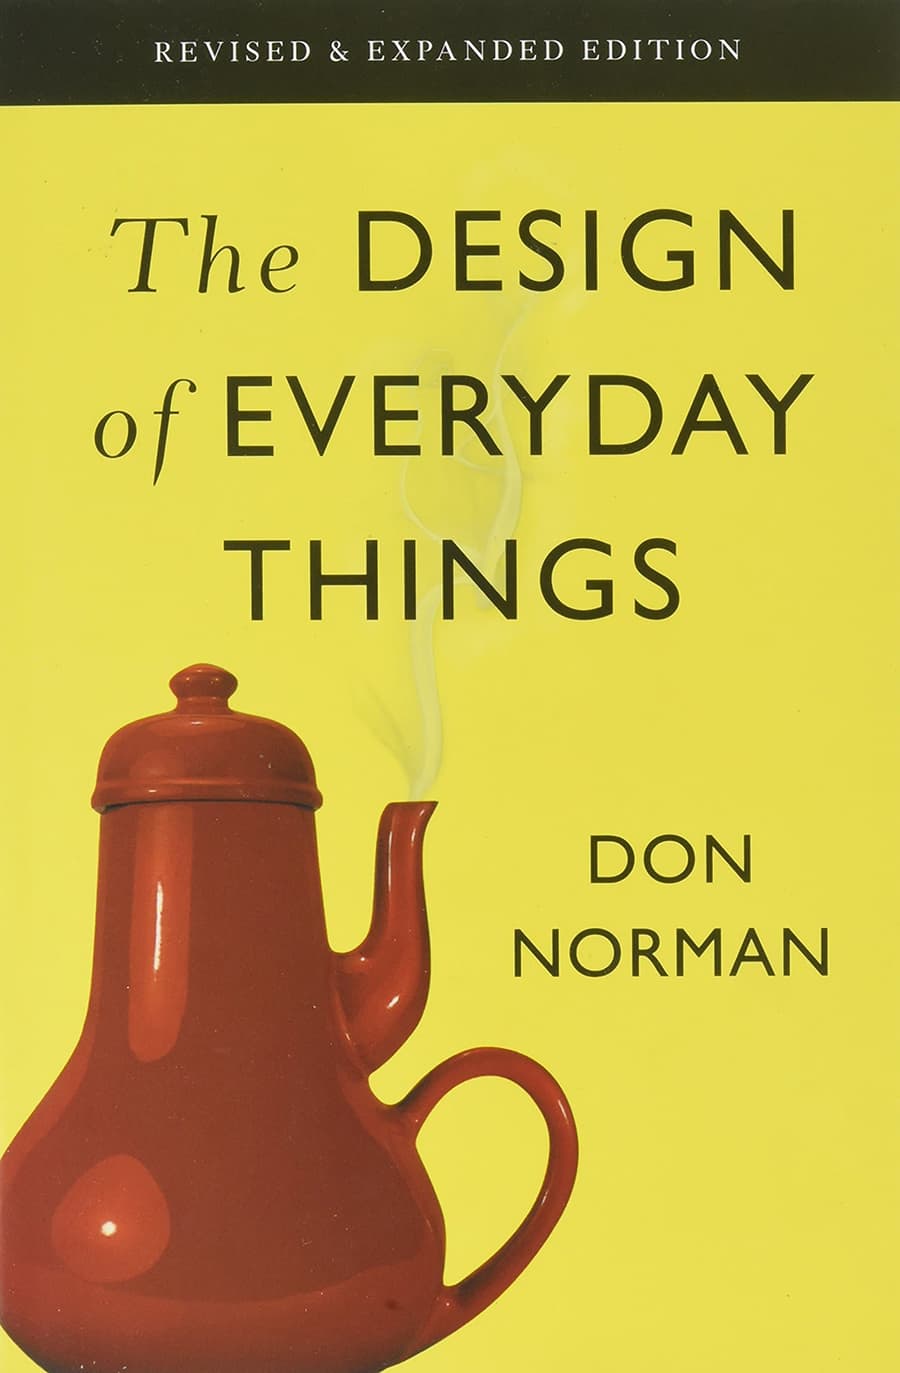 The cover of The Design of Everyday Things